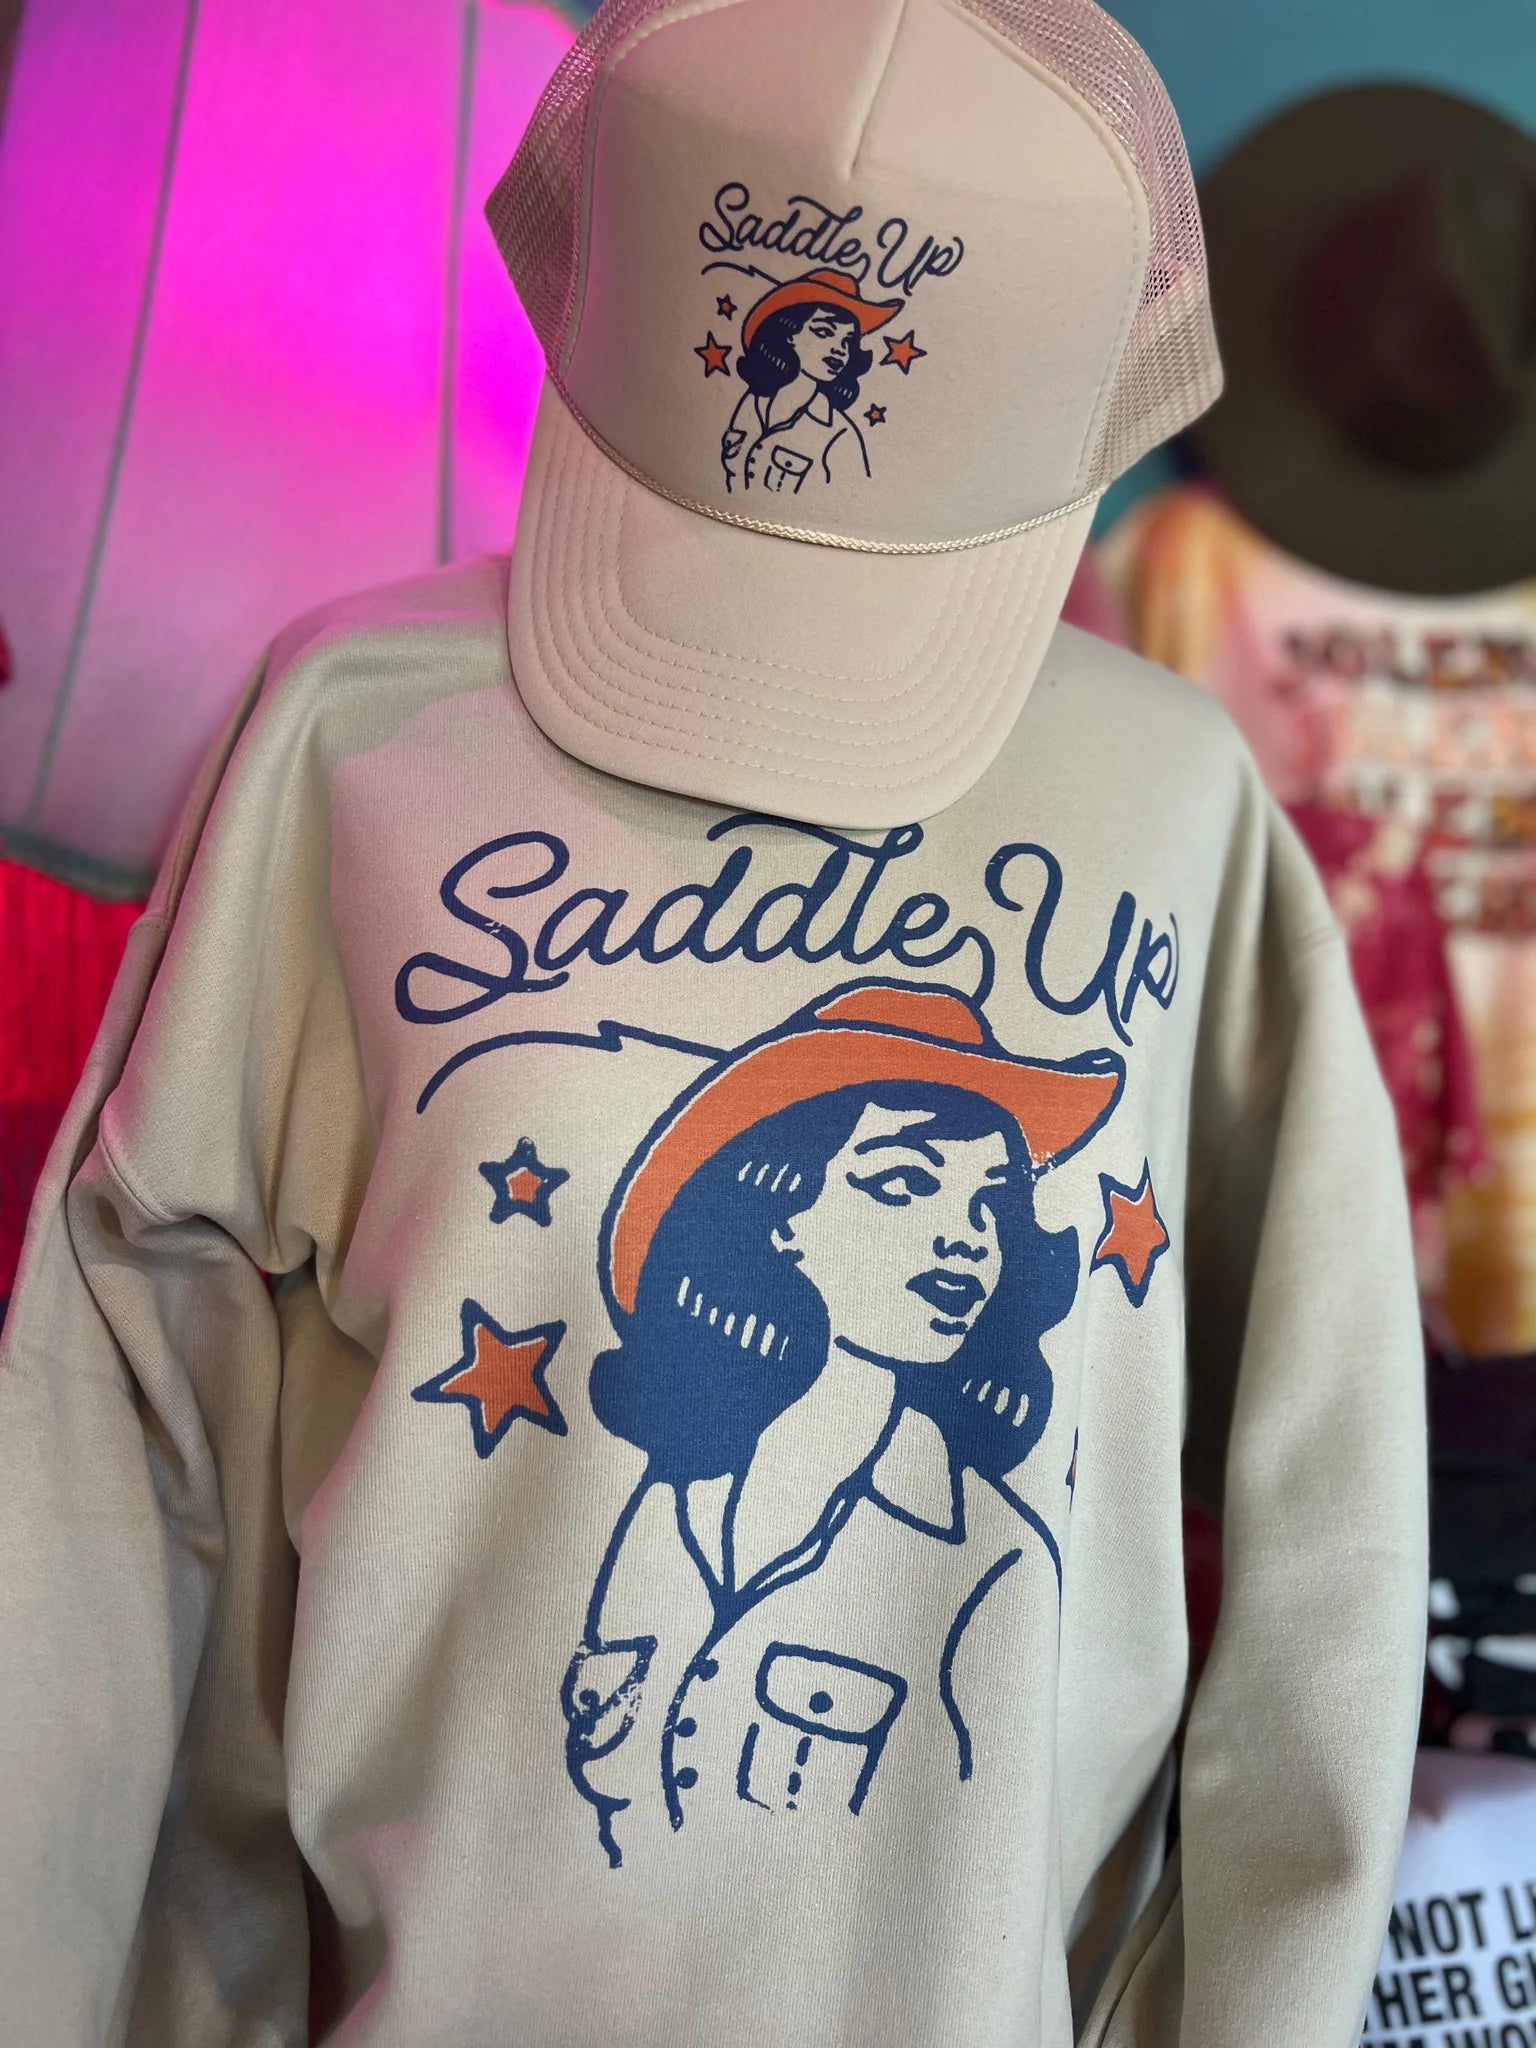 http://baharanchwesternwear.com/cdn/shop/files/saddle-up-cowgirl-multiple-color-options-in-tee-or-sweatshirt-missmudpie-graphic-tee-wholesale-texas-41210912997599_1024x1024_2x_3cdc2652-0bf3-4471-8cfd-71eb93818b84.webp?v=1709478655